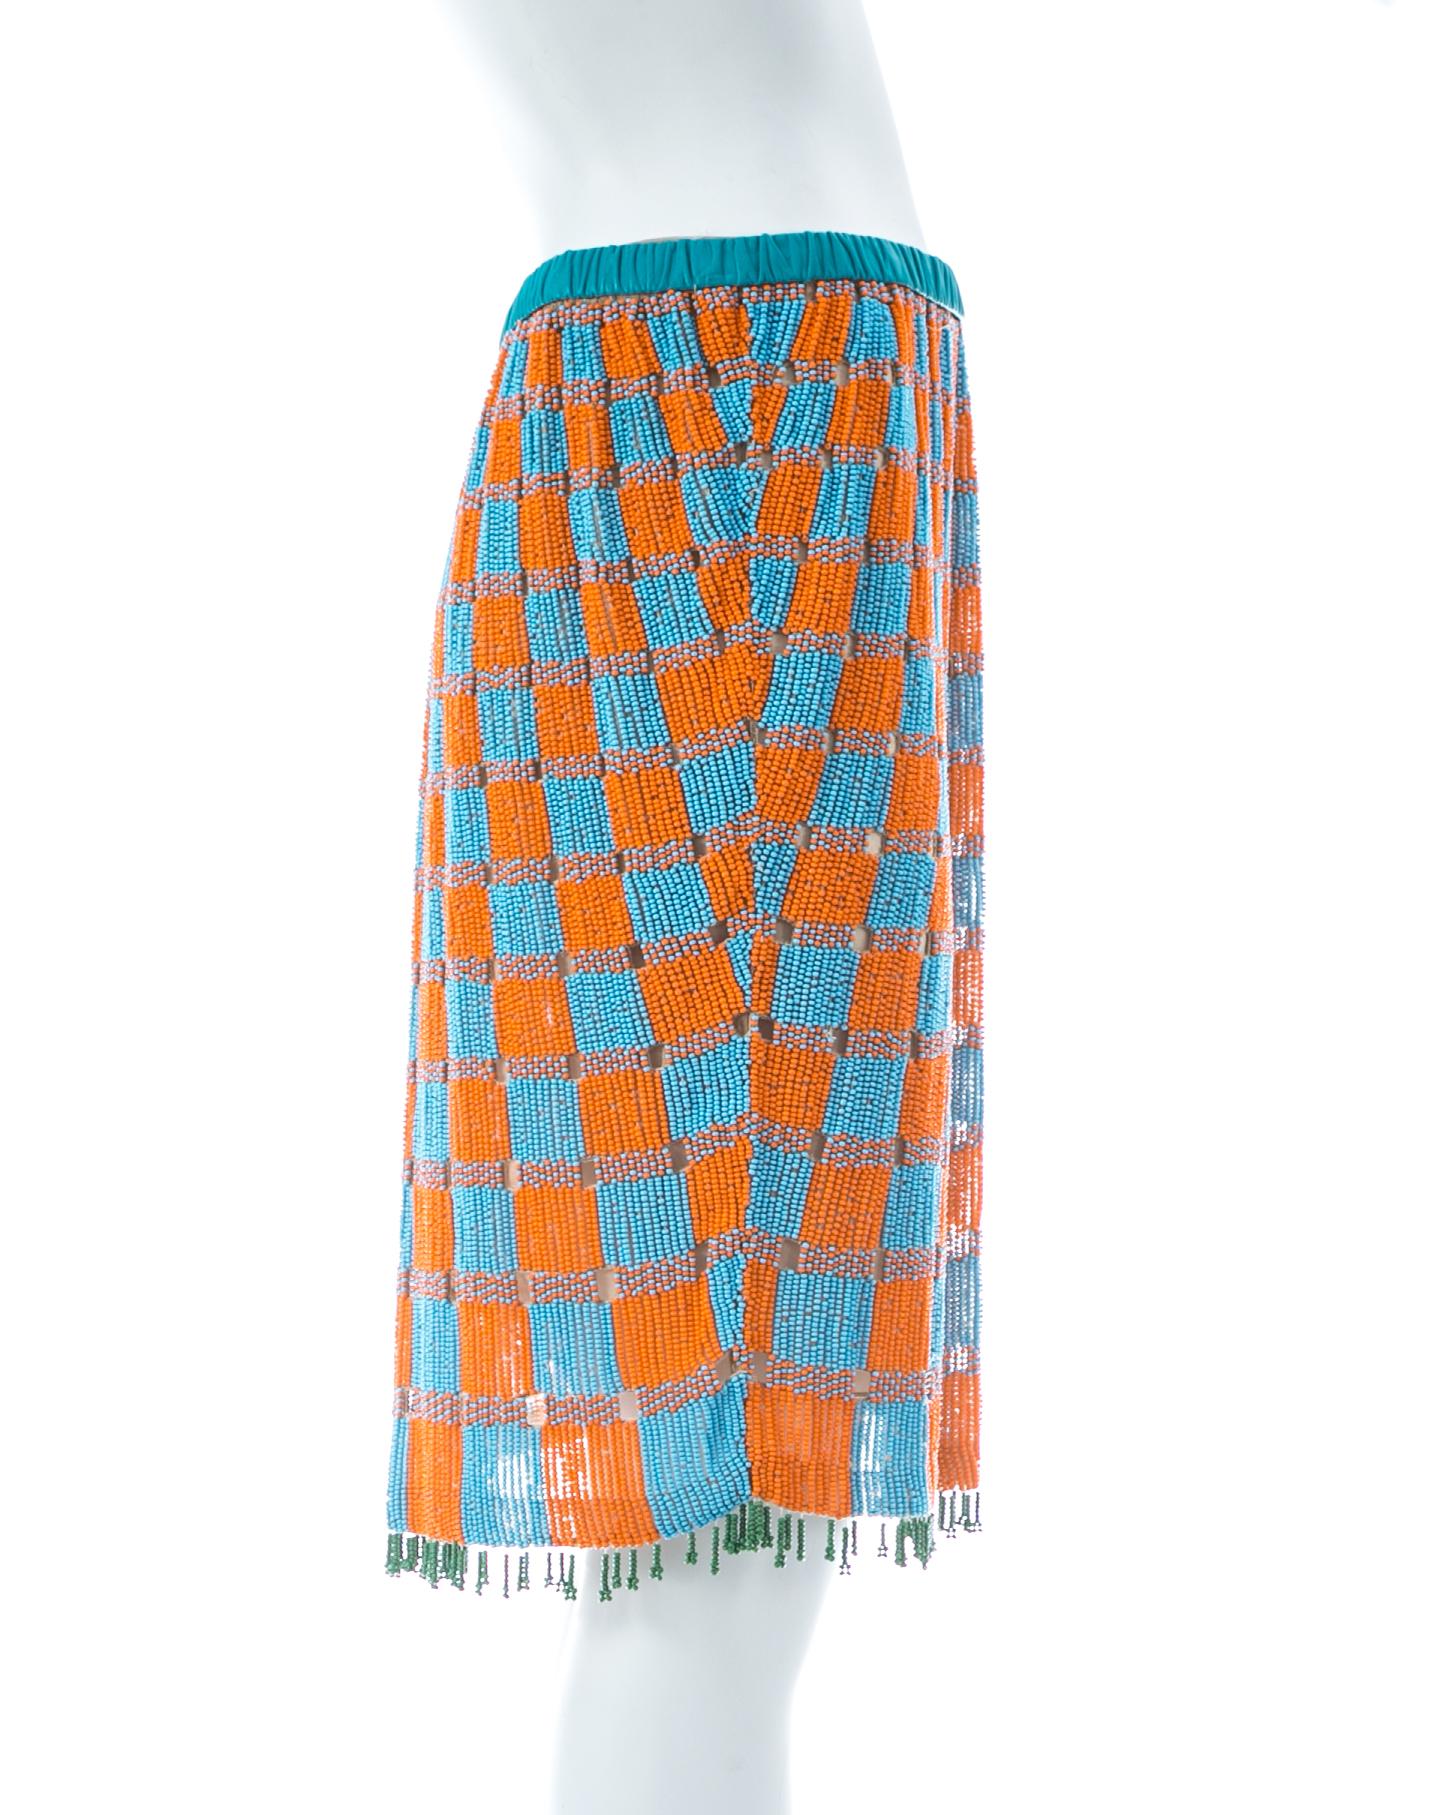 Gucci by Tom Ford orange and blue beaded fringed silk skirt, ss 1999 For Sale 2